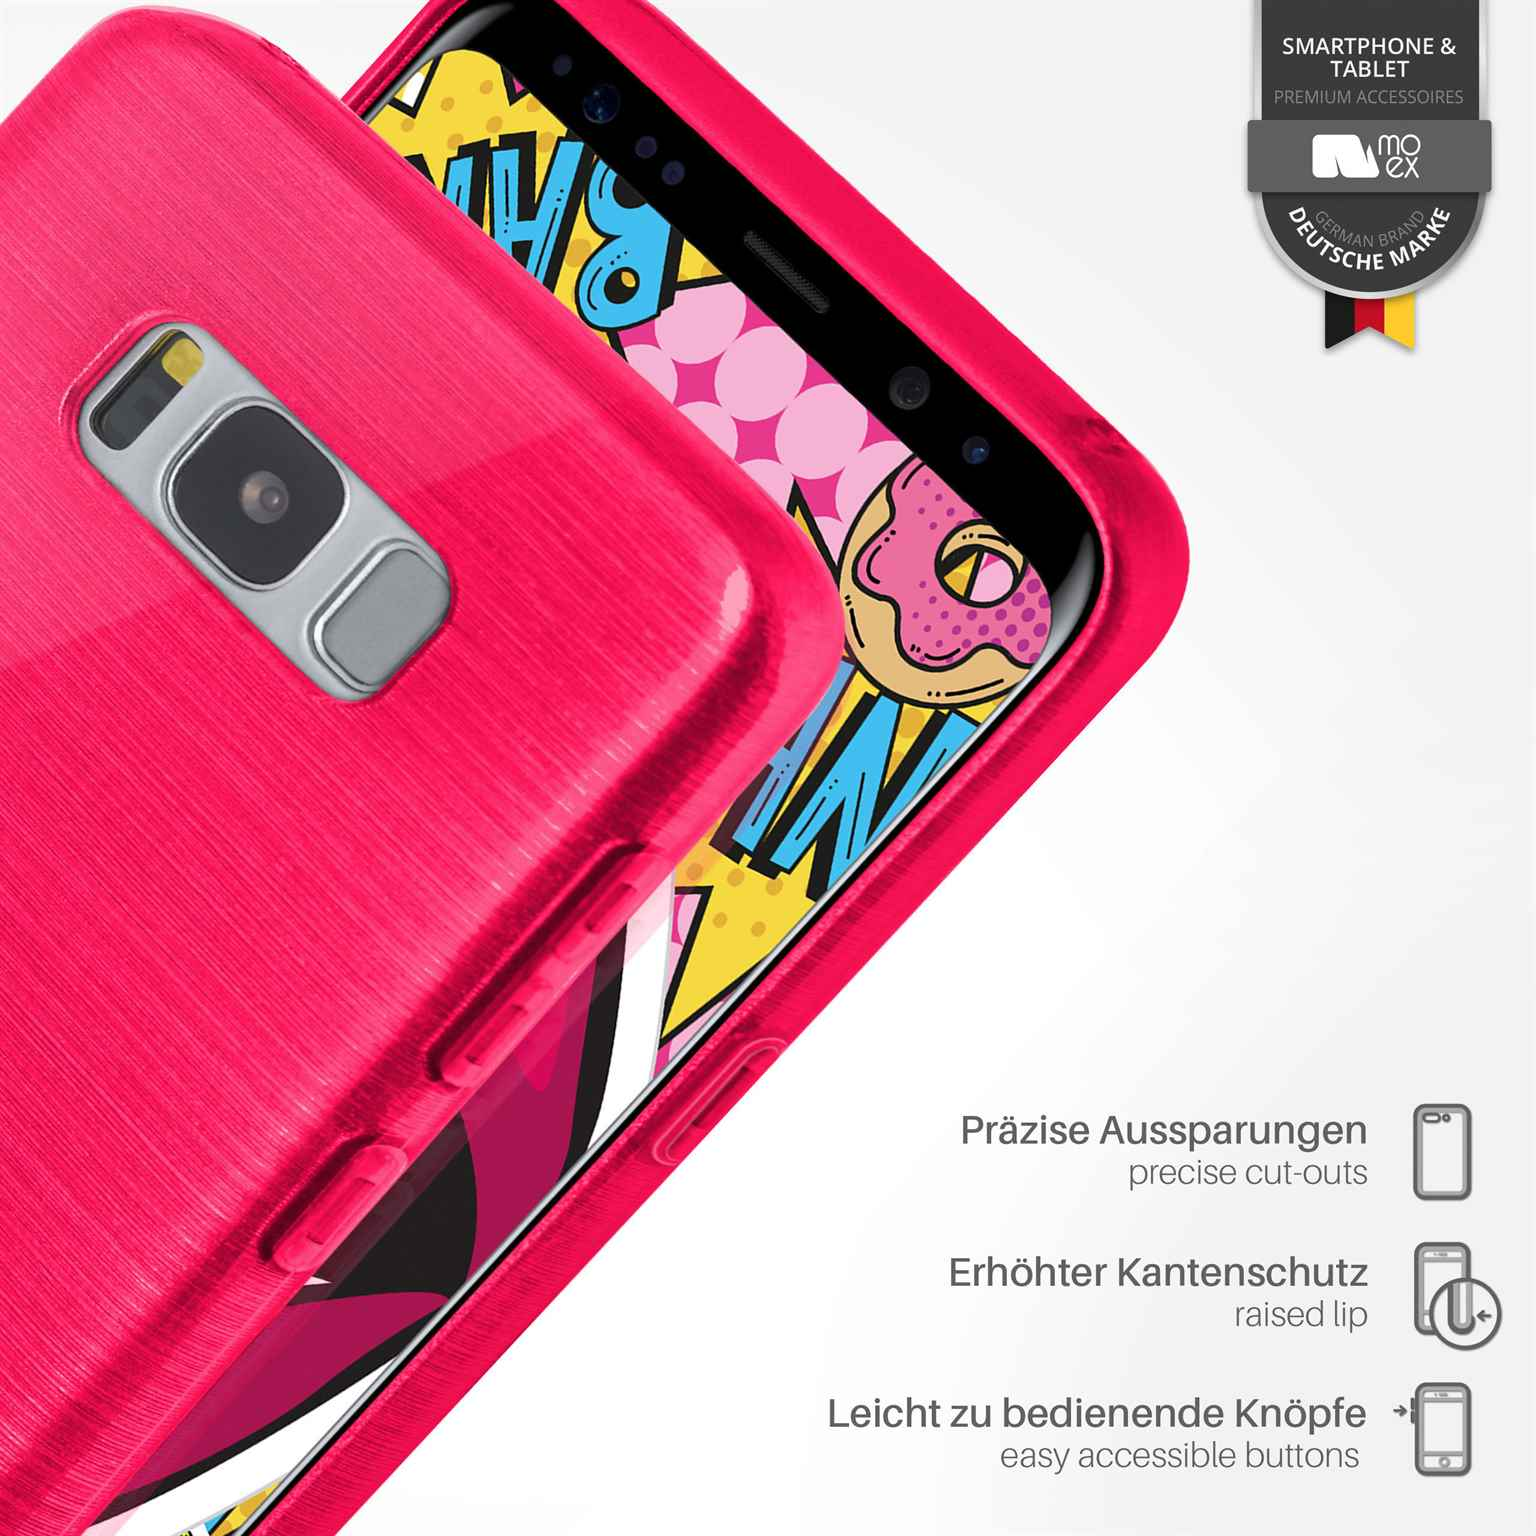 MOEX Brushed Case, S8, Galaxy Backcover, Magenta-Pink Samsung